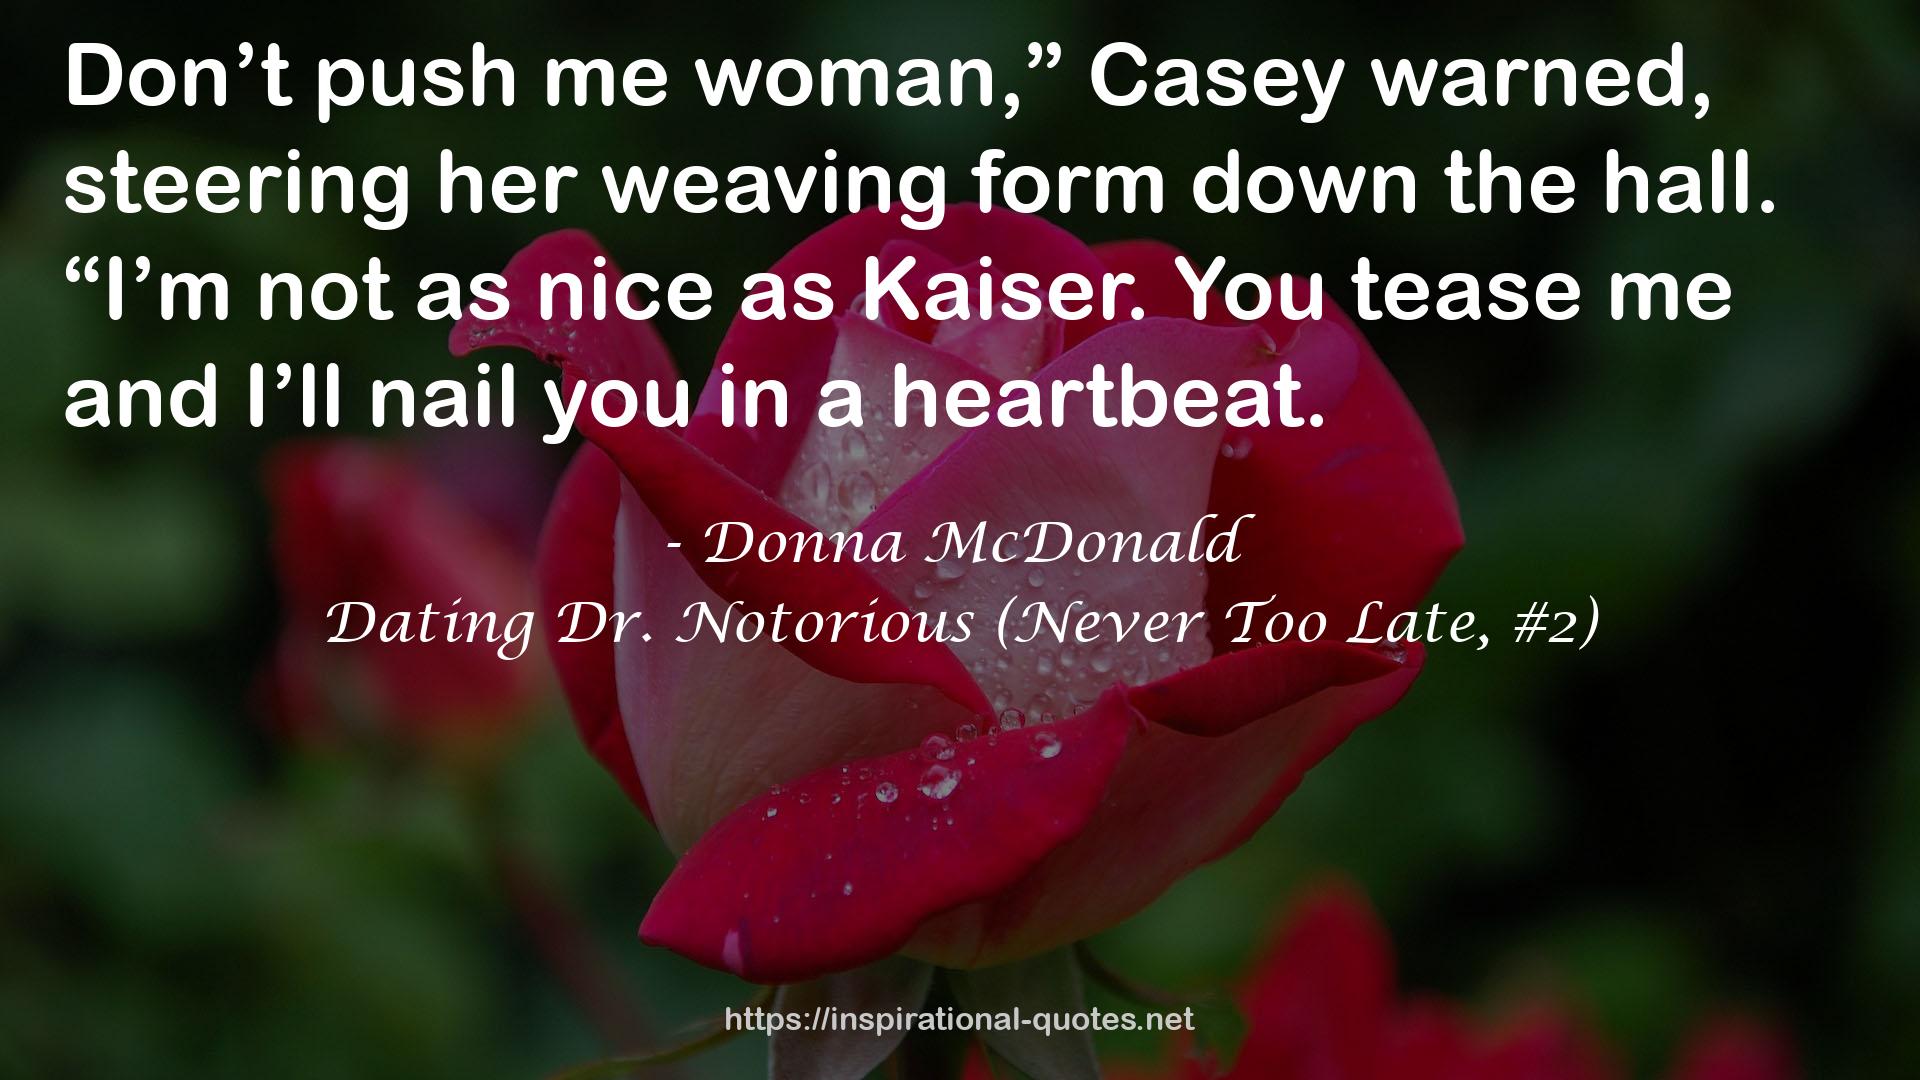 Dating Dr. Notorious (Never Too Late, #2) QUOTES